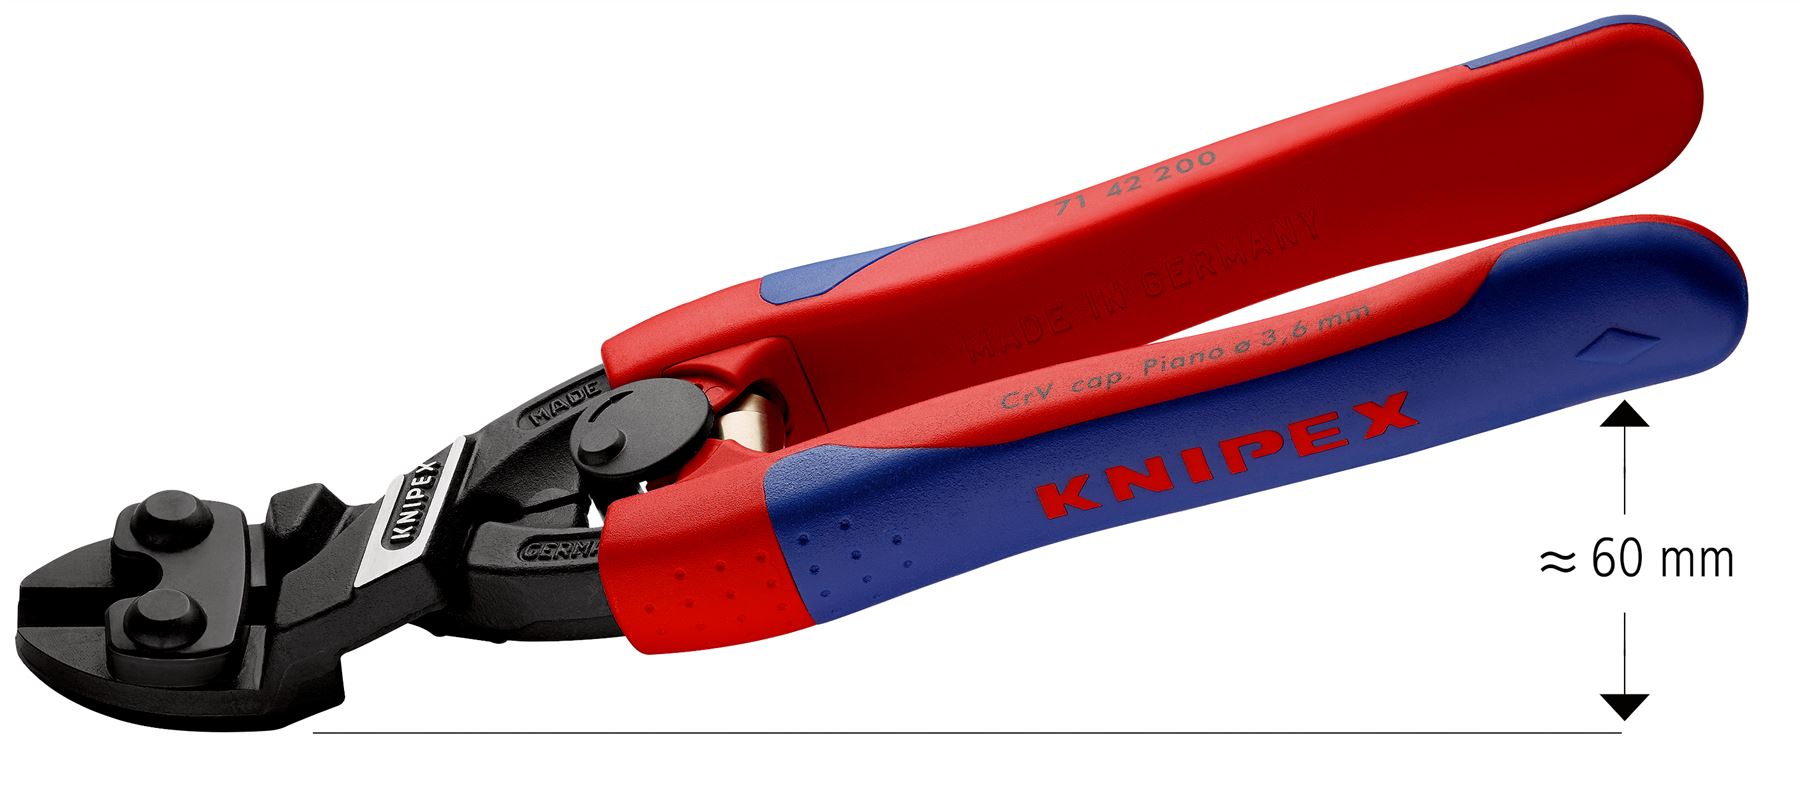 Knipex Cobolt Compact Bolt Cutters Cutting Pliers 200mm Multi Component Grips 71 42 200